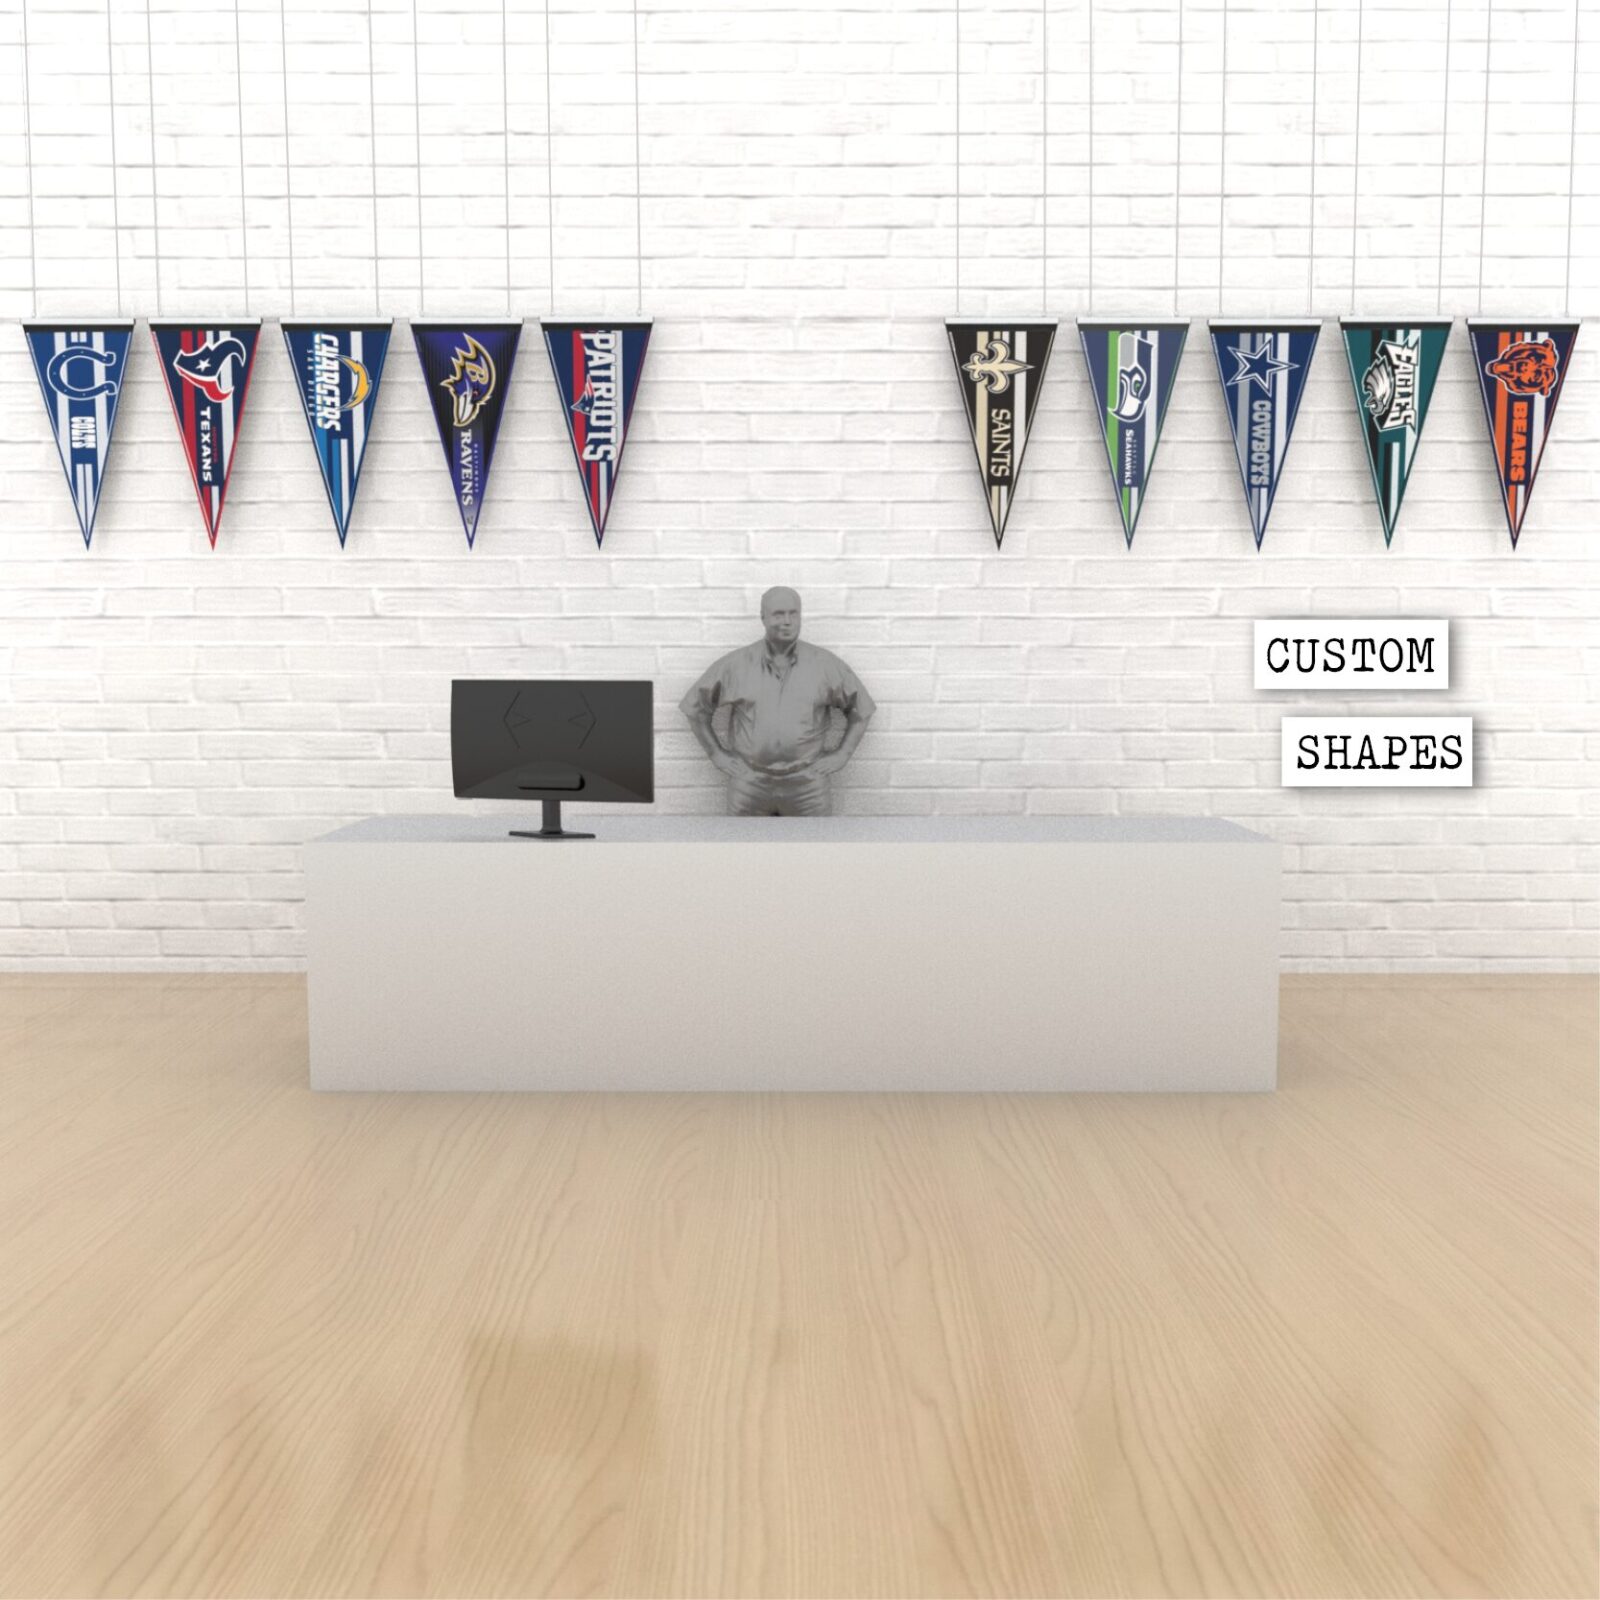 SEG Banner Rail Rendering with suspended pennant flags behind checkout counter